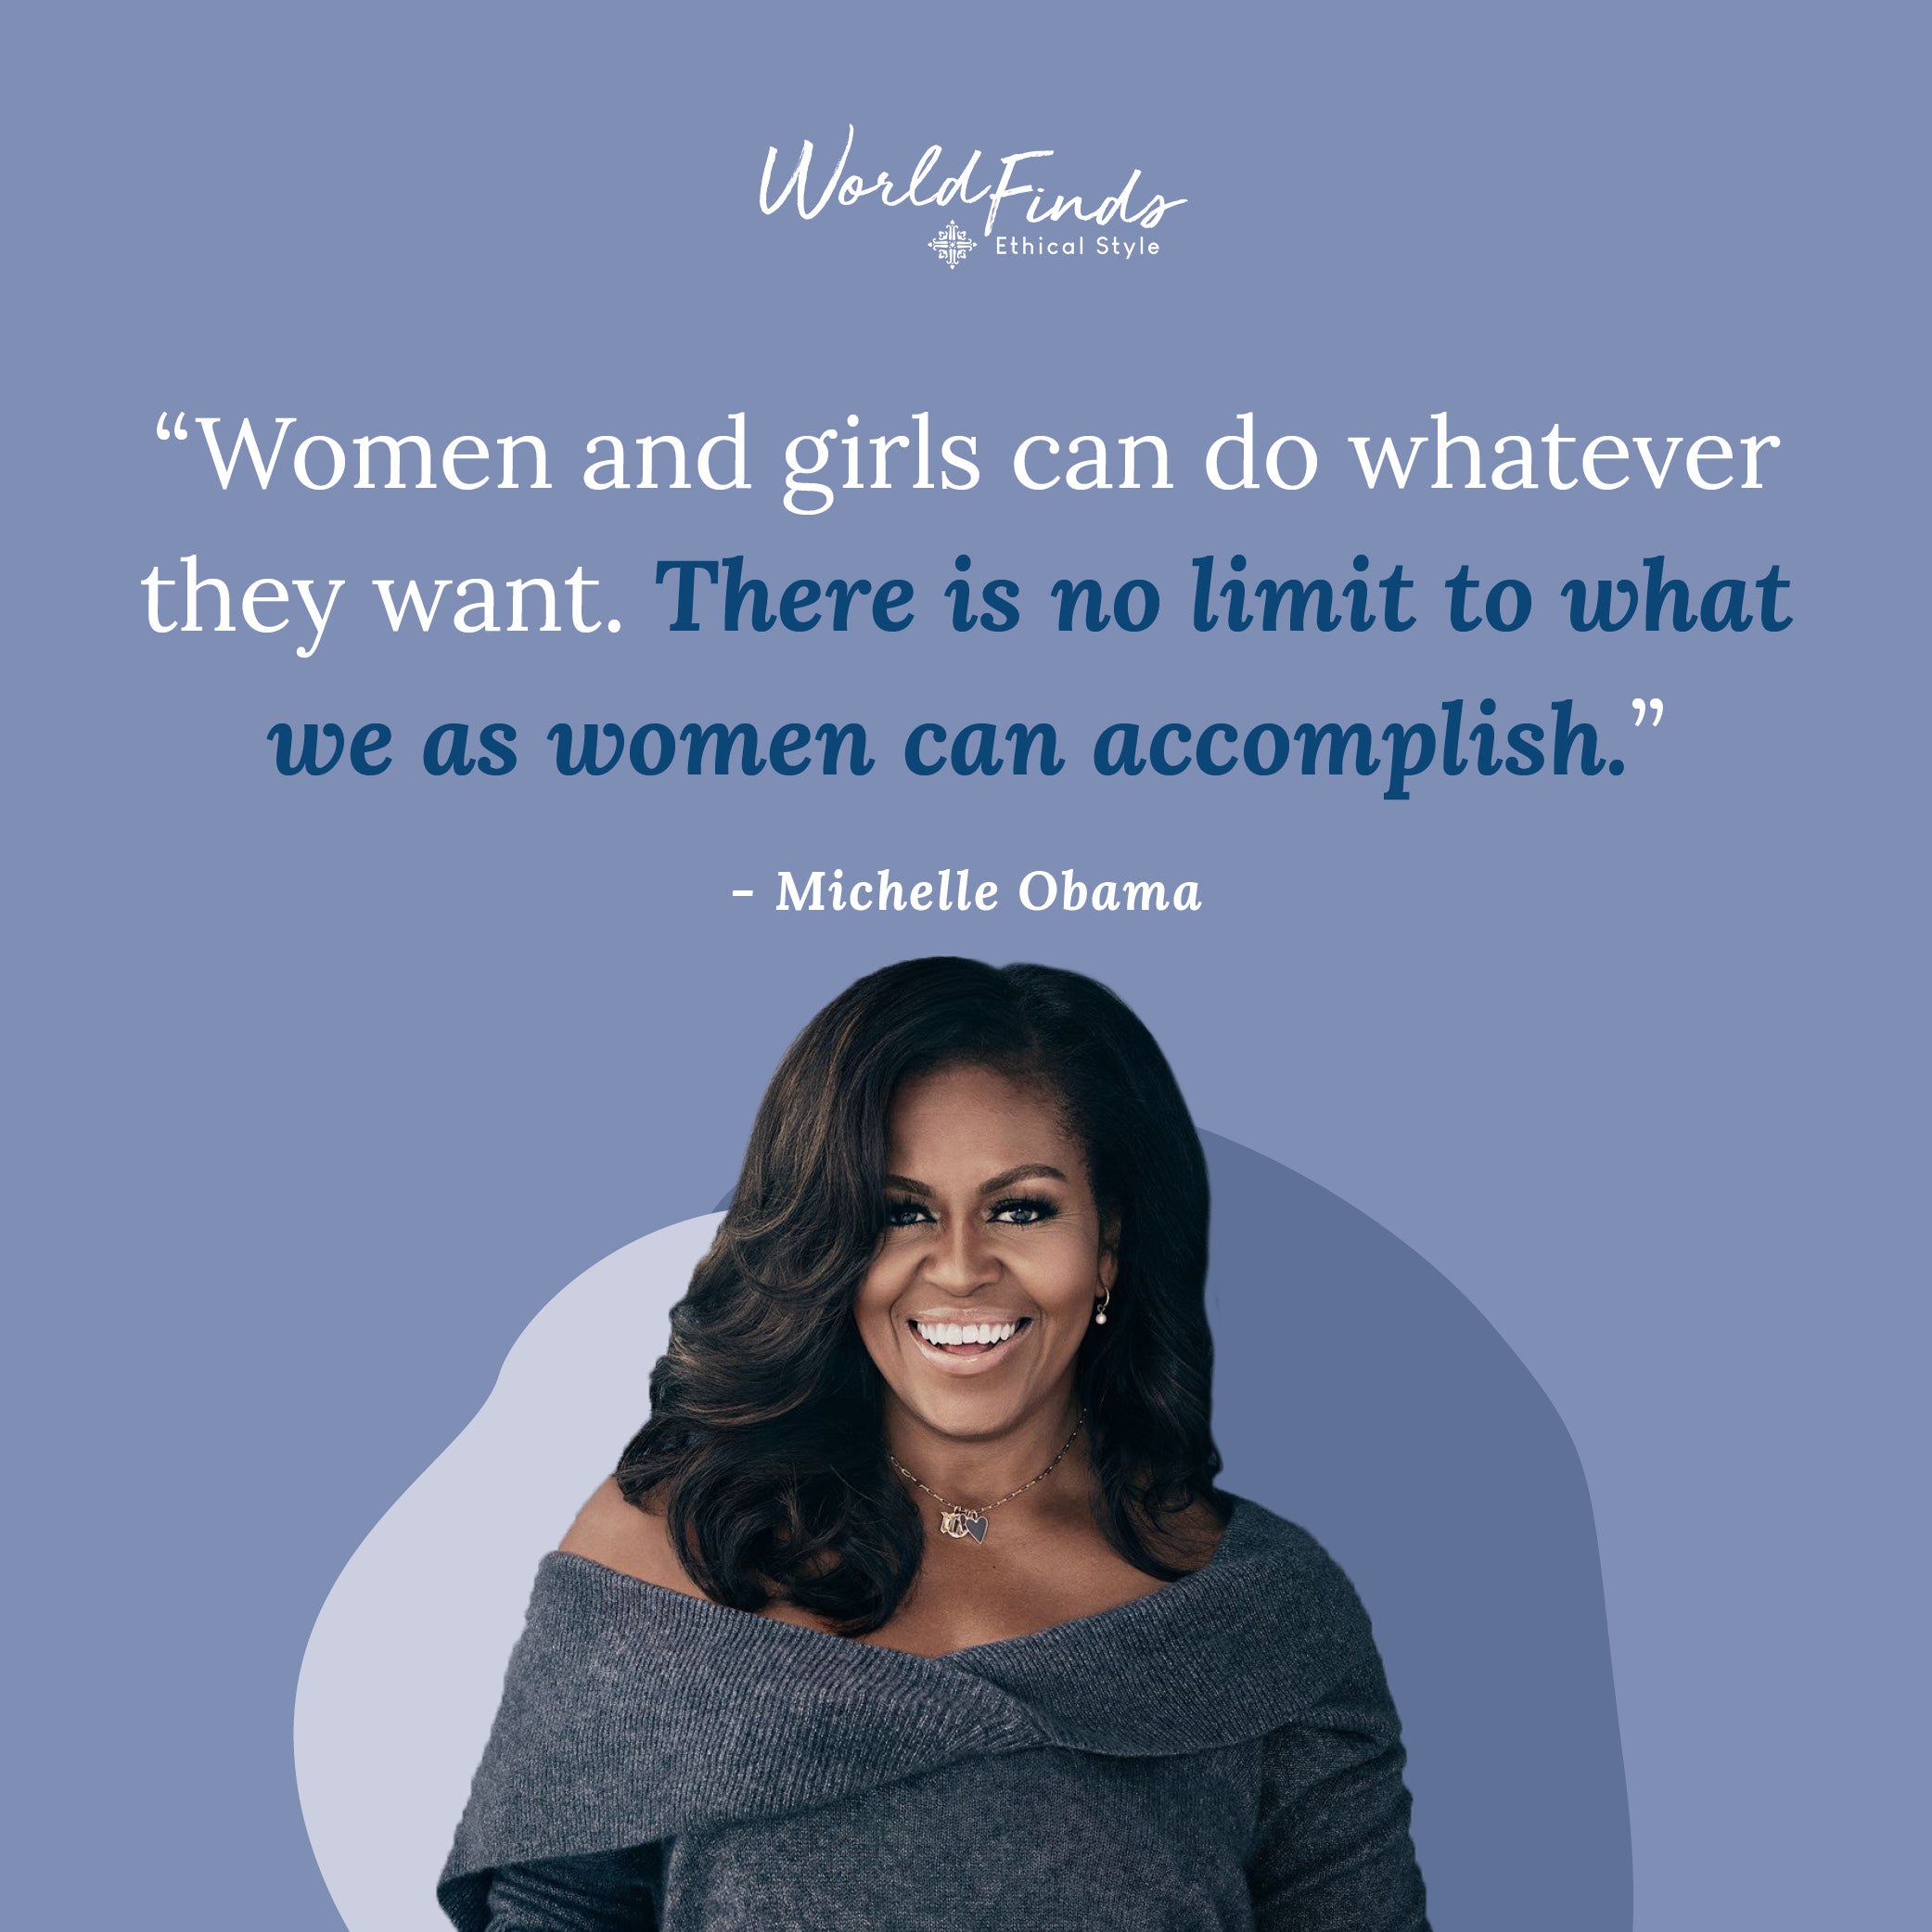 Quote from Michelle Obama, "Women and girls can do whatever they want. There is no limit to what we as women can accomplish."